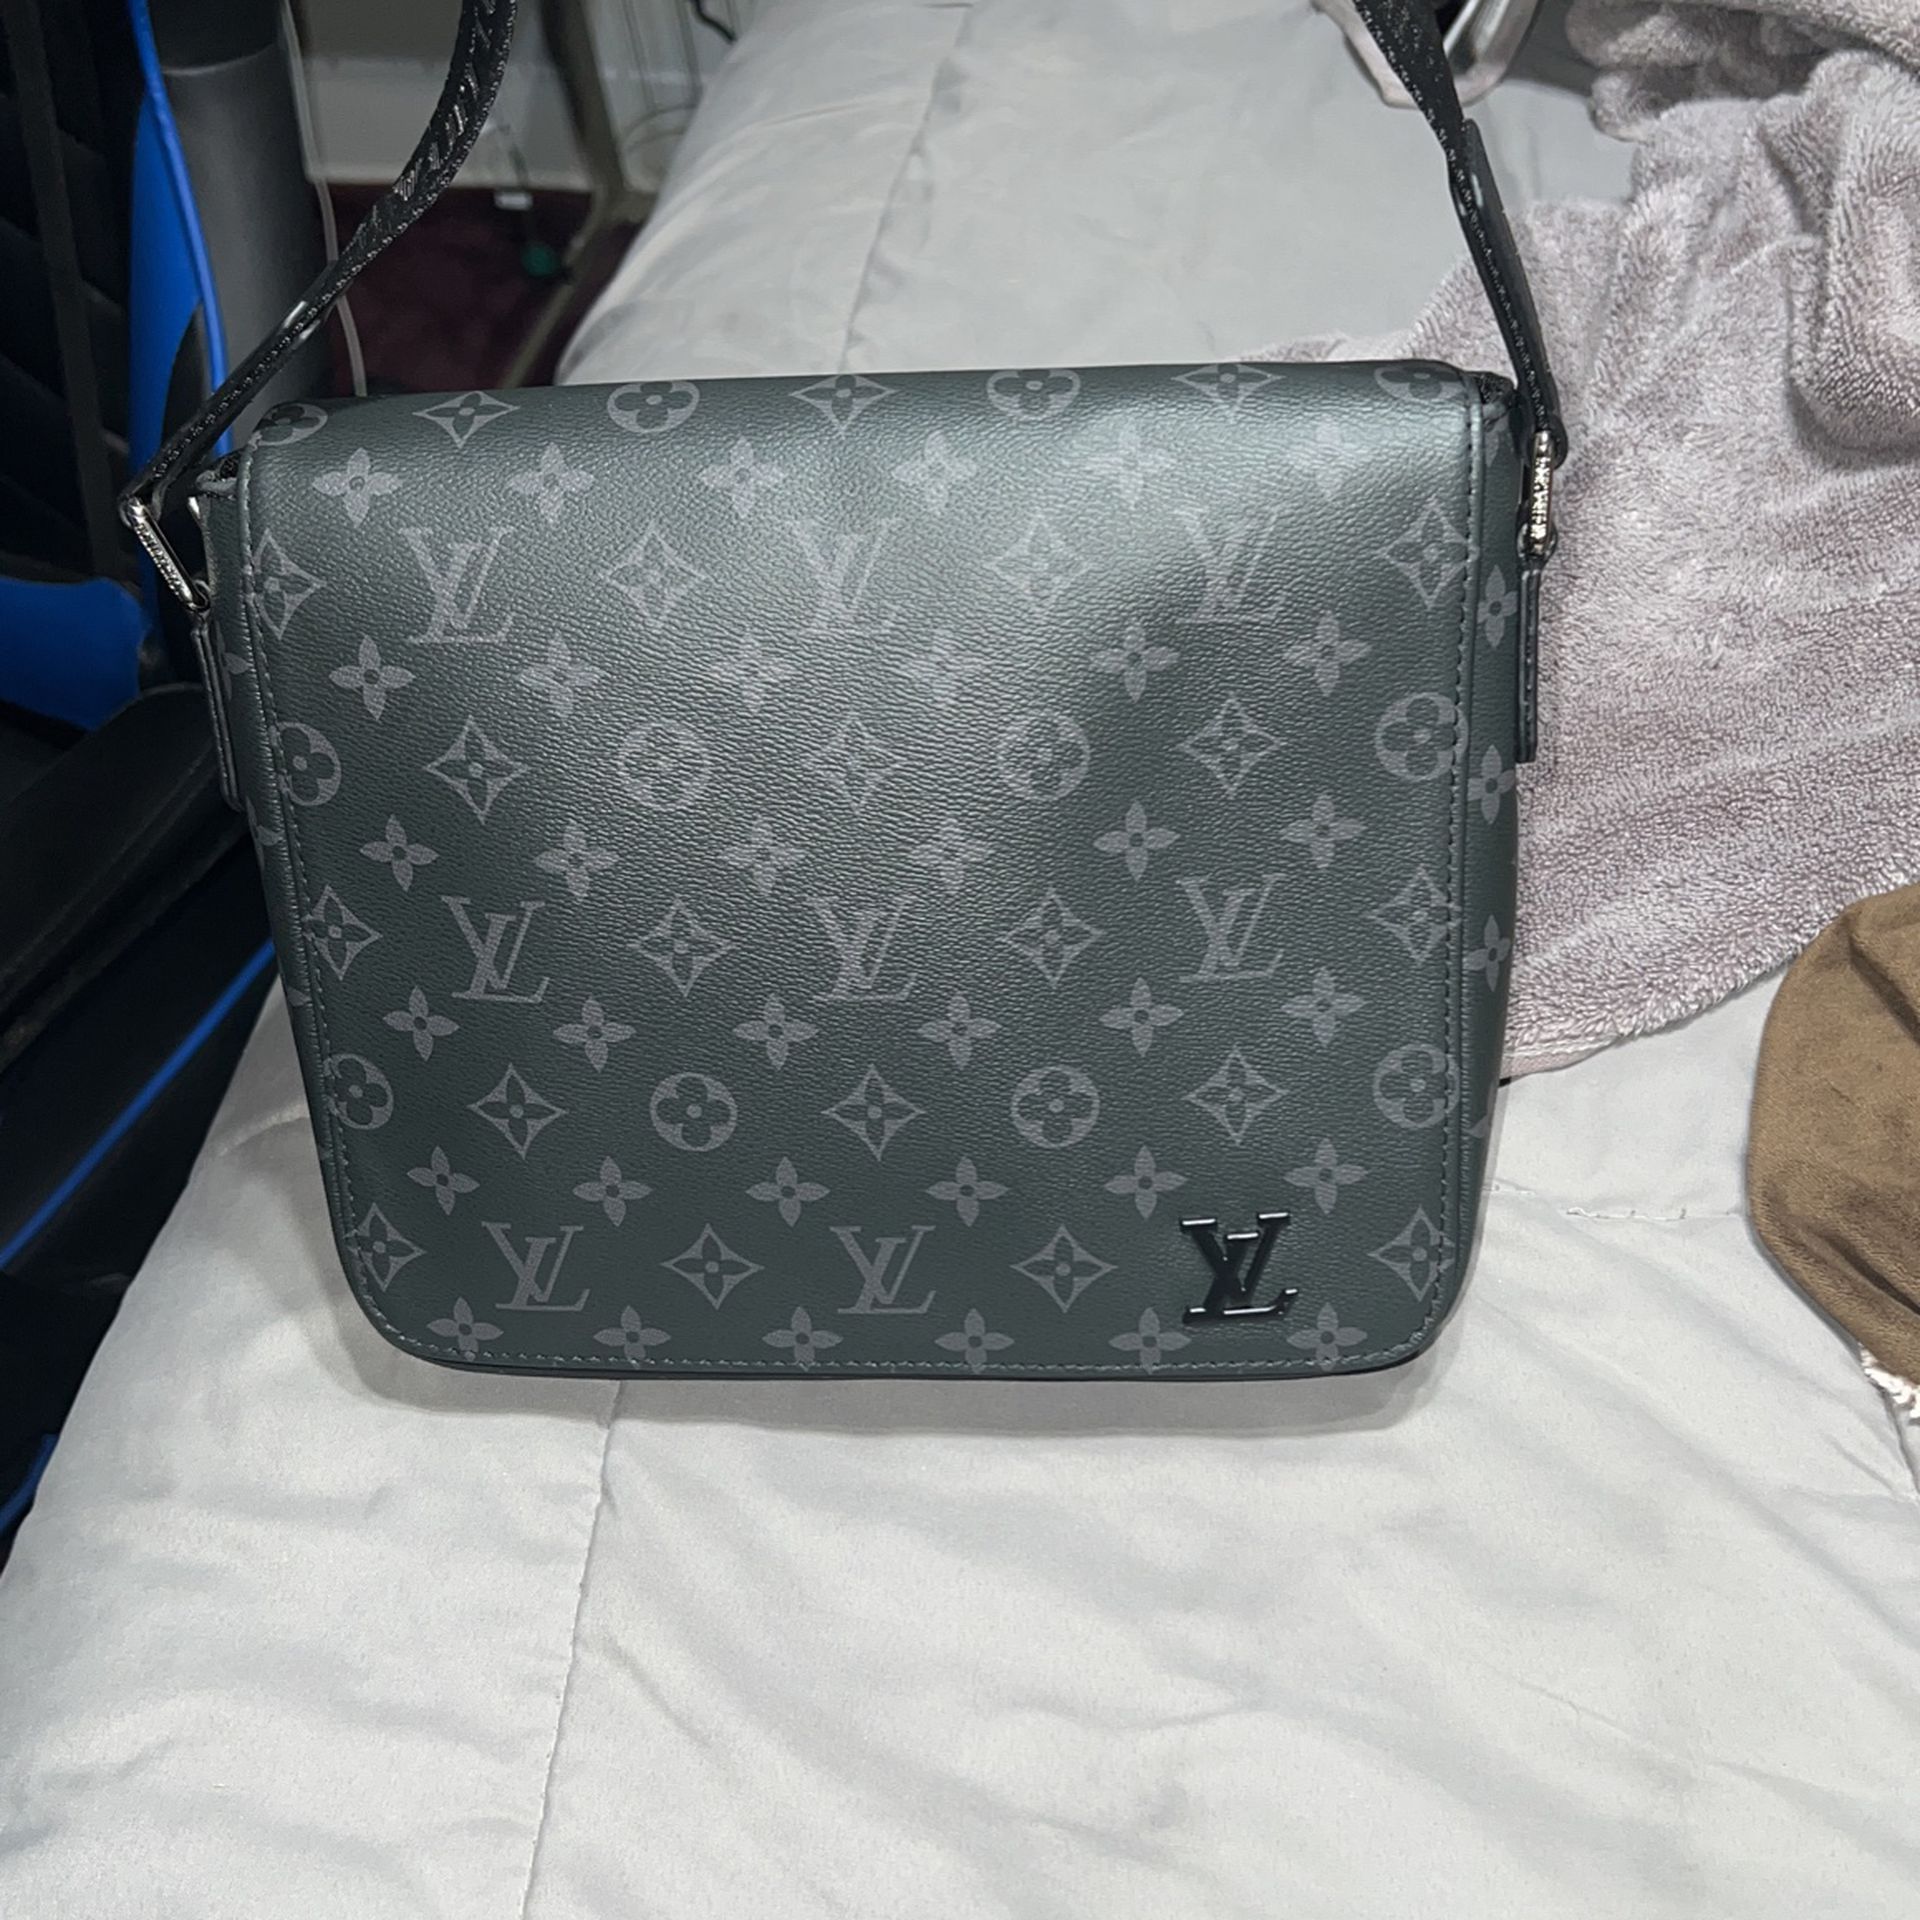 Authentic LV Women's Classic Bag Old Flower Messenger Bag for Sale in  Kalispell, MT - OfferUp